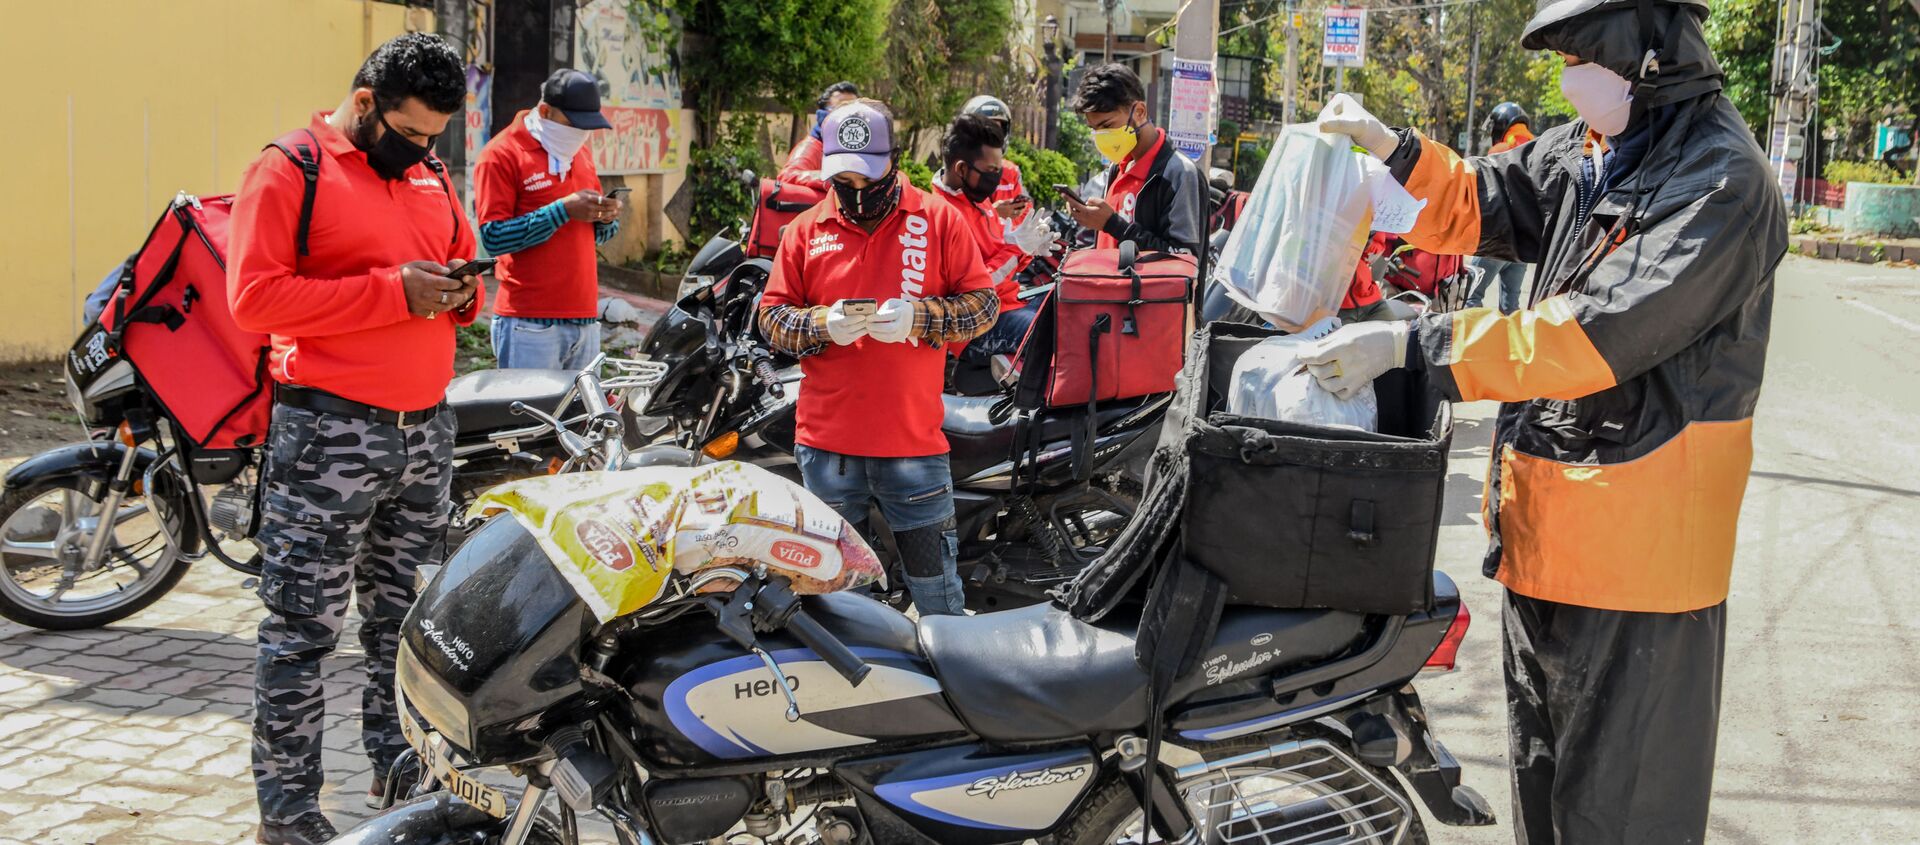 A Swiggy delivery man (R) wearing a facemask puts food commodities in the bag tied to his motorbike to deliver to customers as other Zomato delivery men check their mobile phones during a government-imposed nationwide lockdown as a preventive measure against the COVID-19 coronavirus, in Amritsar on March 28, 2020 - Sputnik International, 1920, 21.05.2020